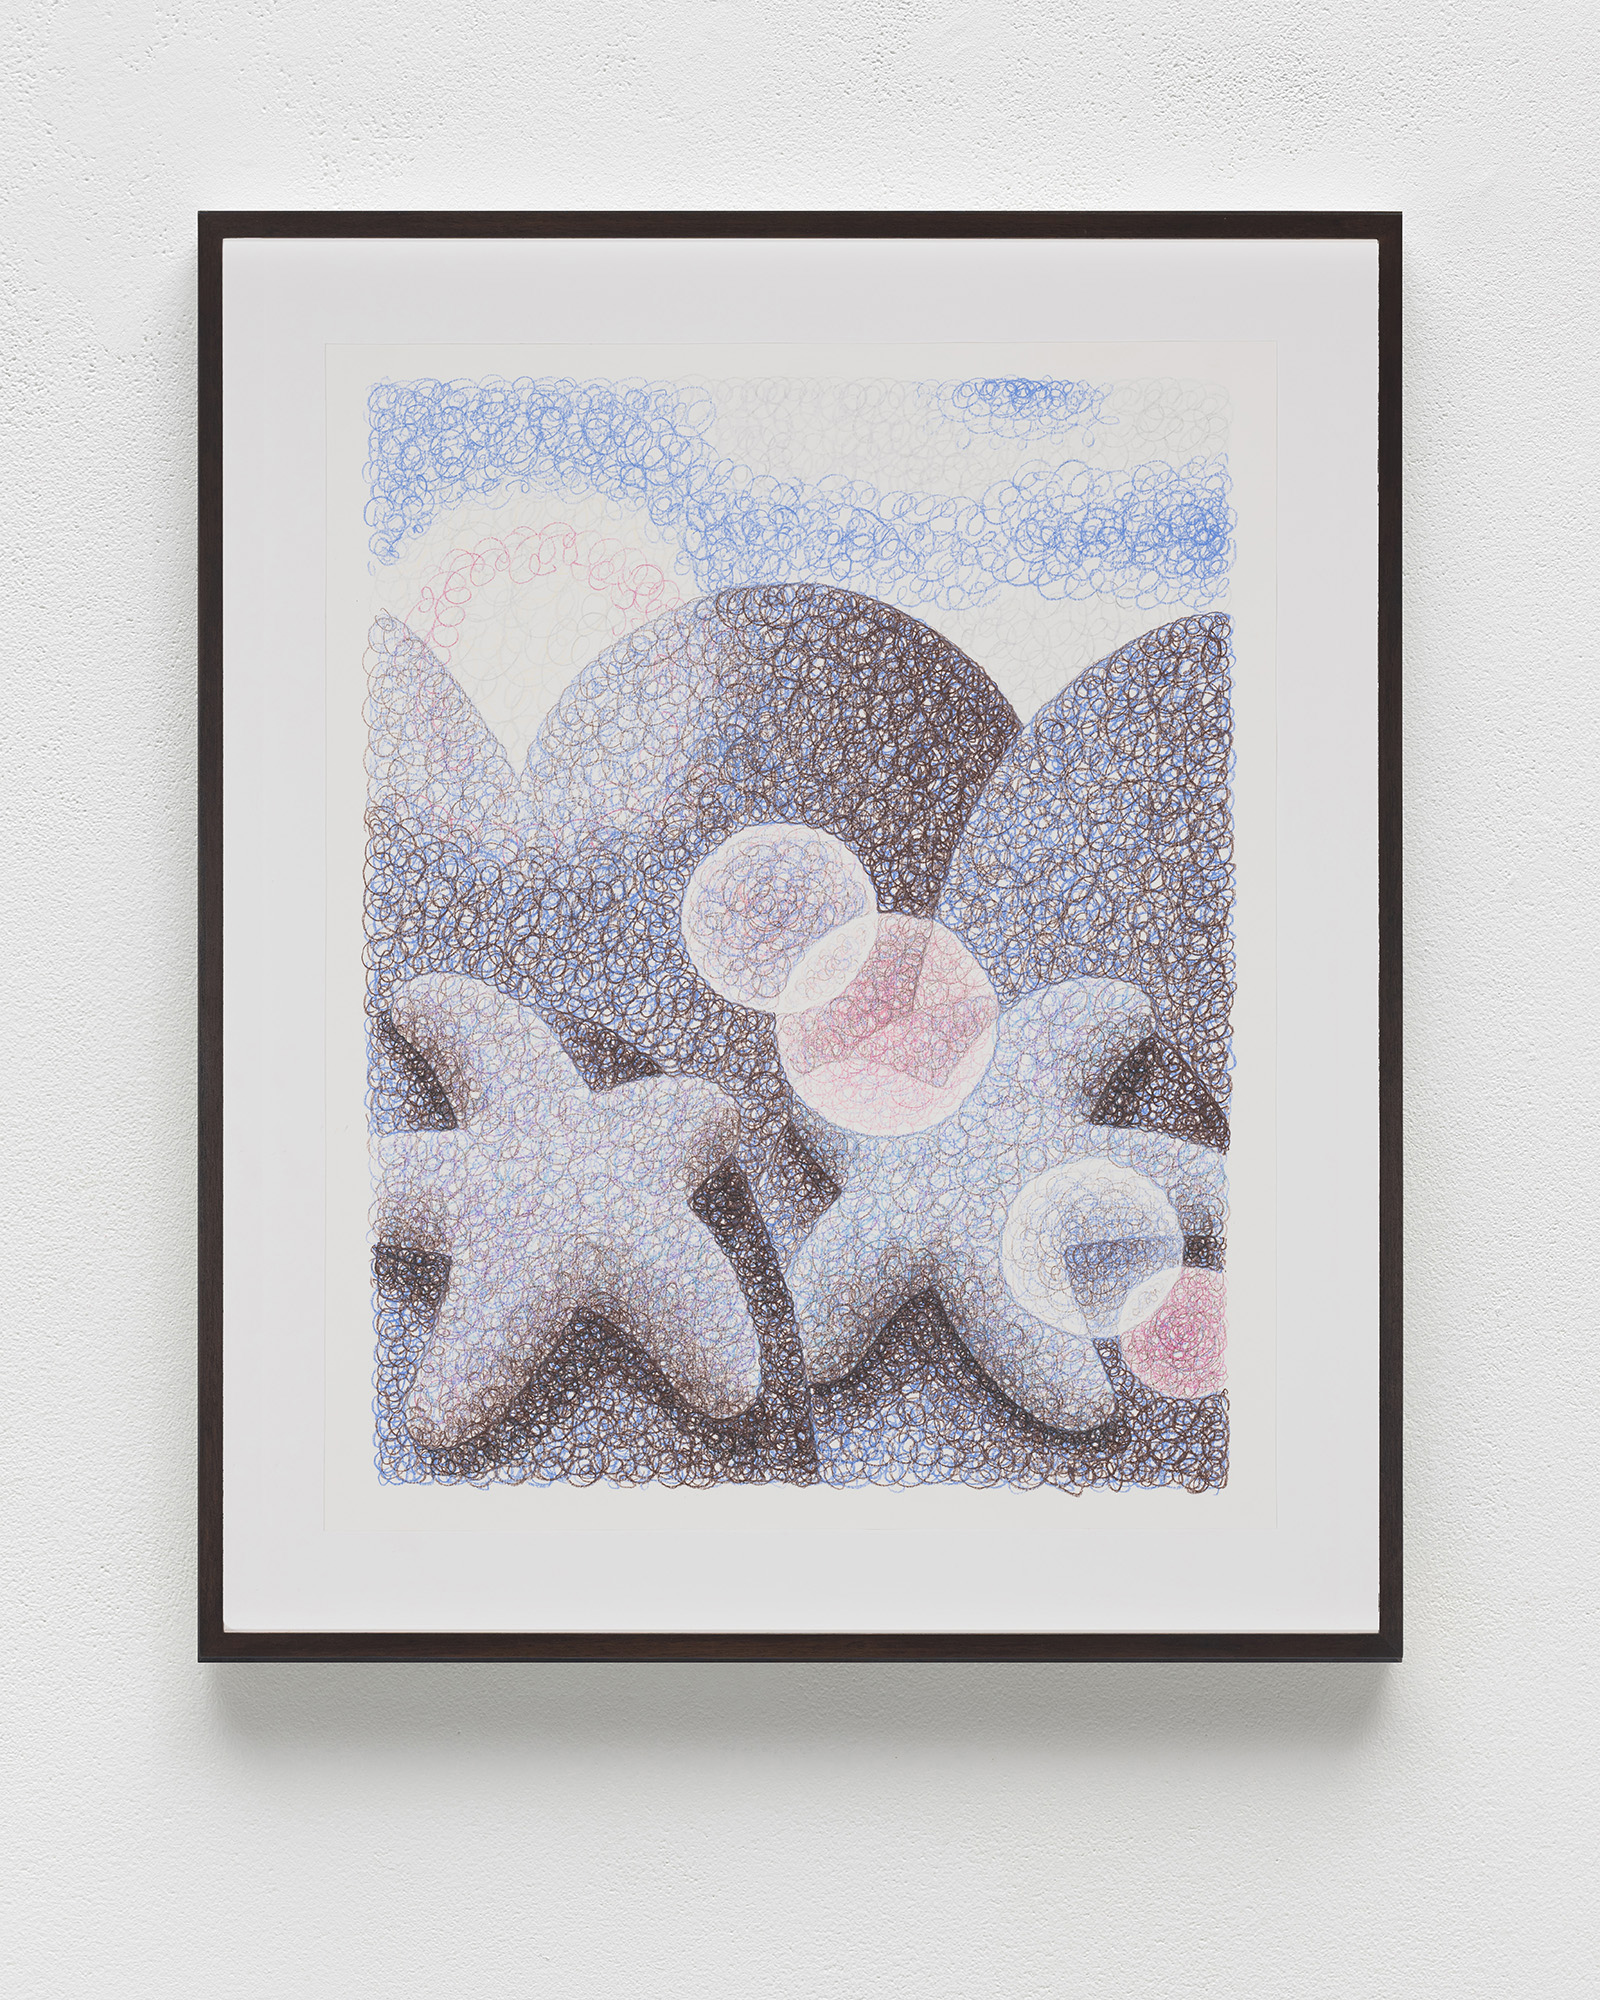 Laurens Legiers, Untitled (Sea Stars with a Moon Glare), 2023, Pencil on paper, 50 x 40 cm, 19 3/4 x 15 3/4 in.